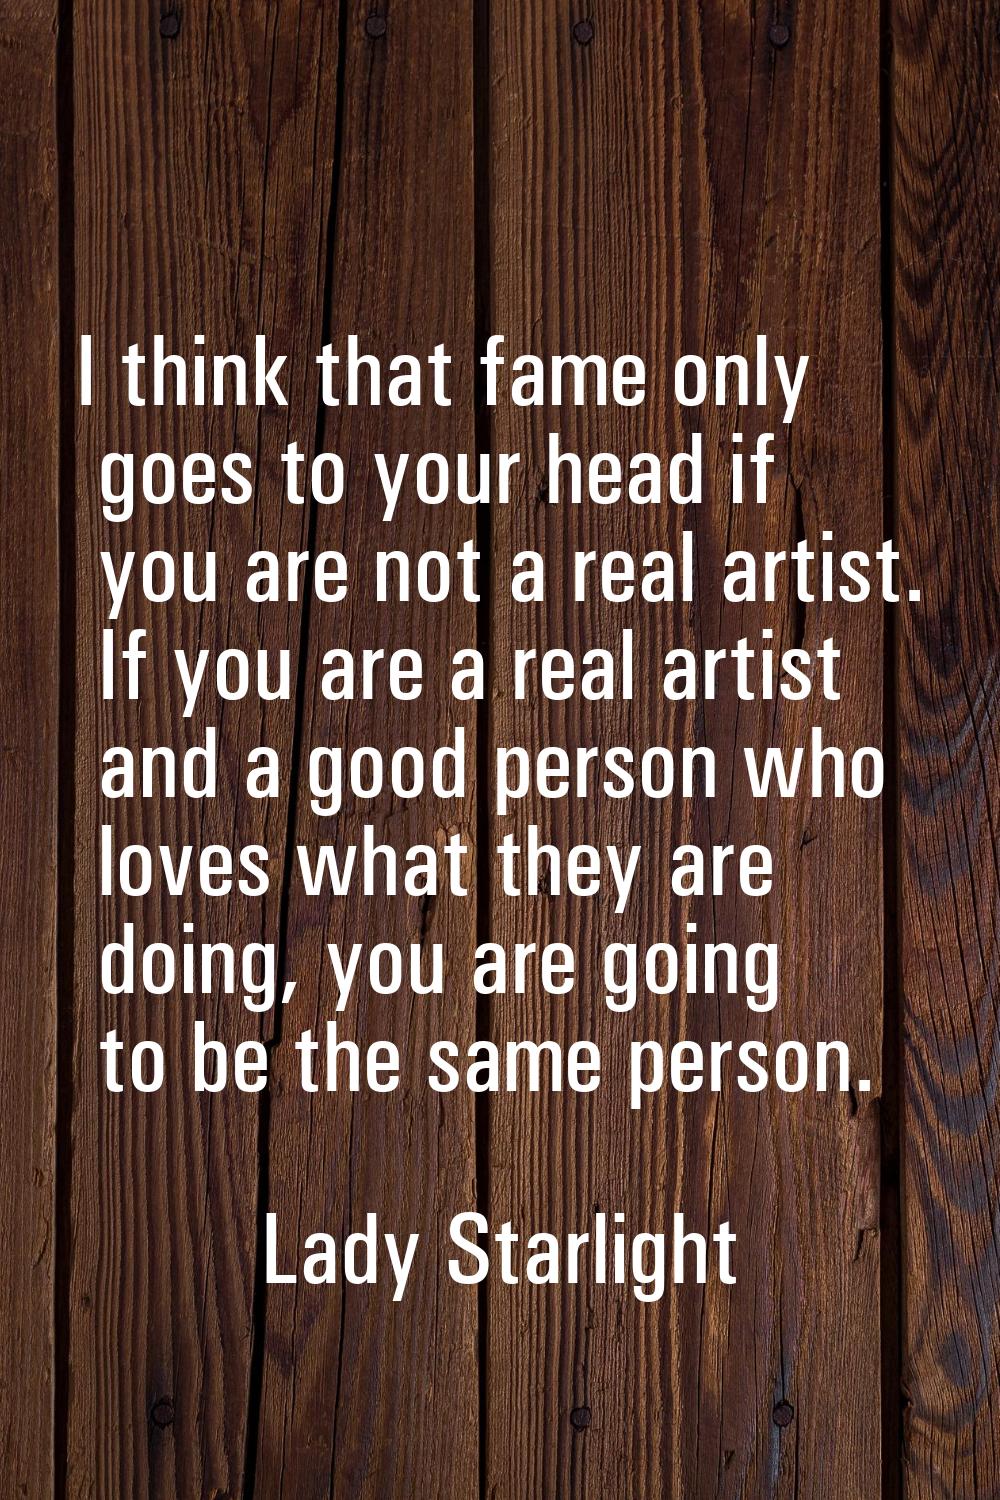 I think that fame only goes to your head if you are not a real artist. If you are a real artist and